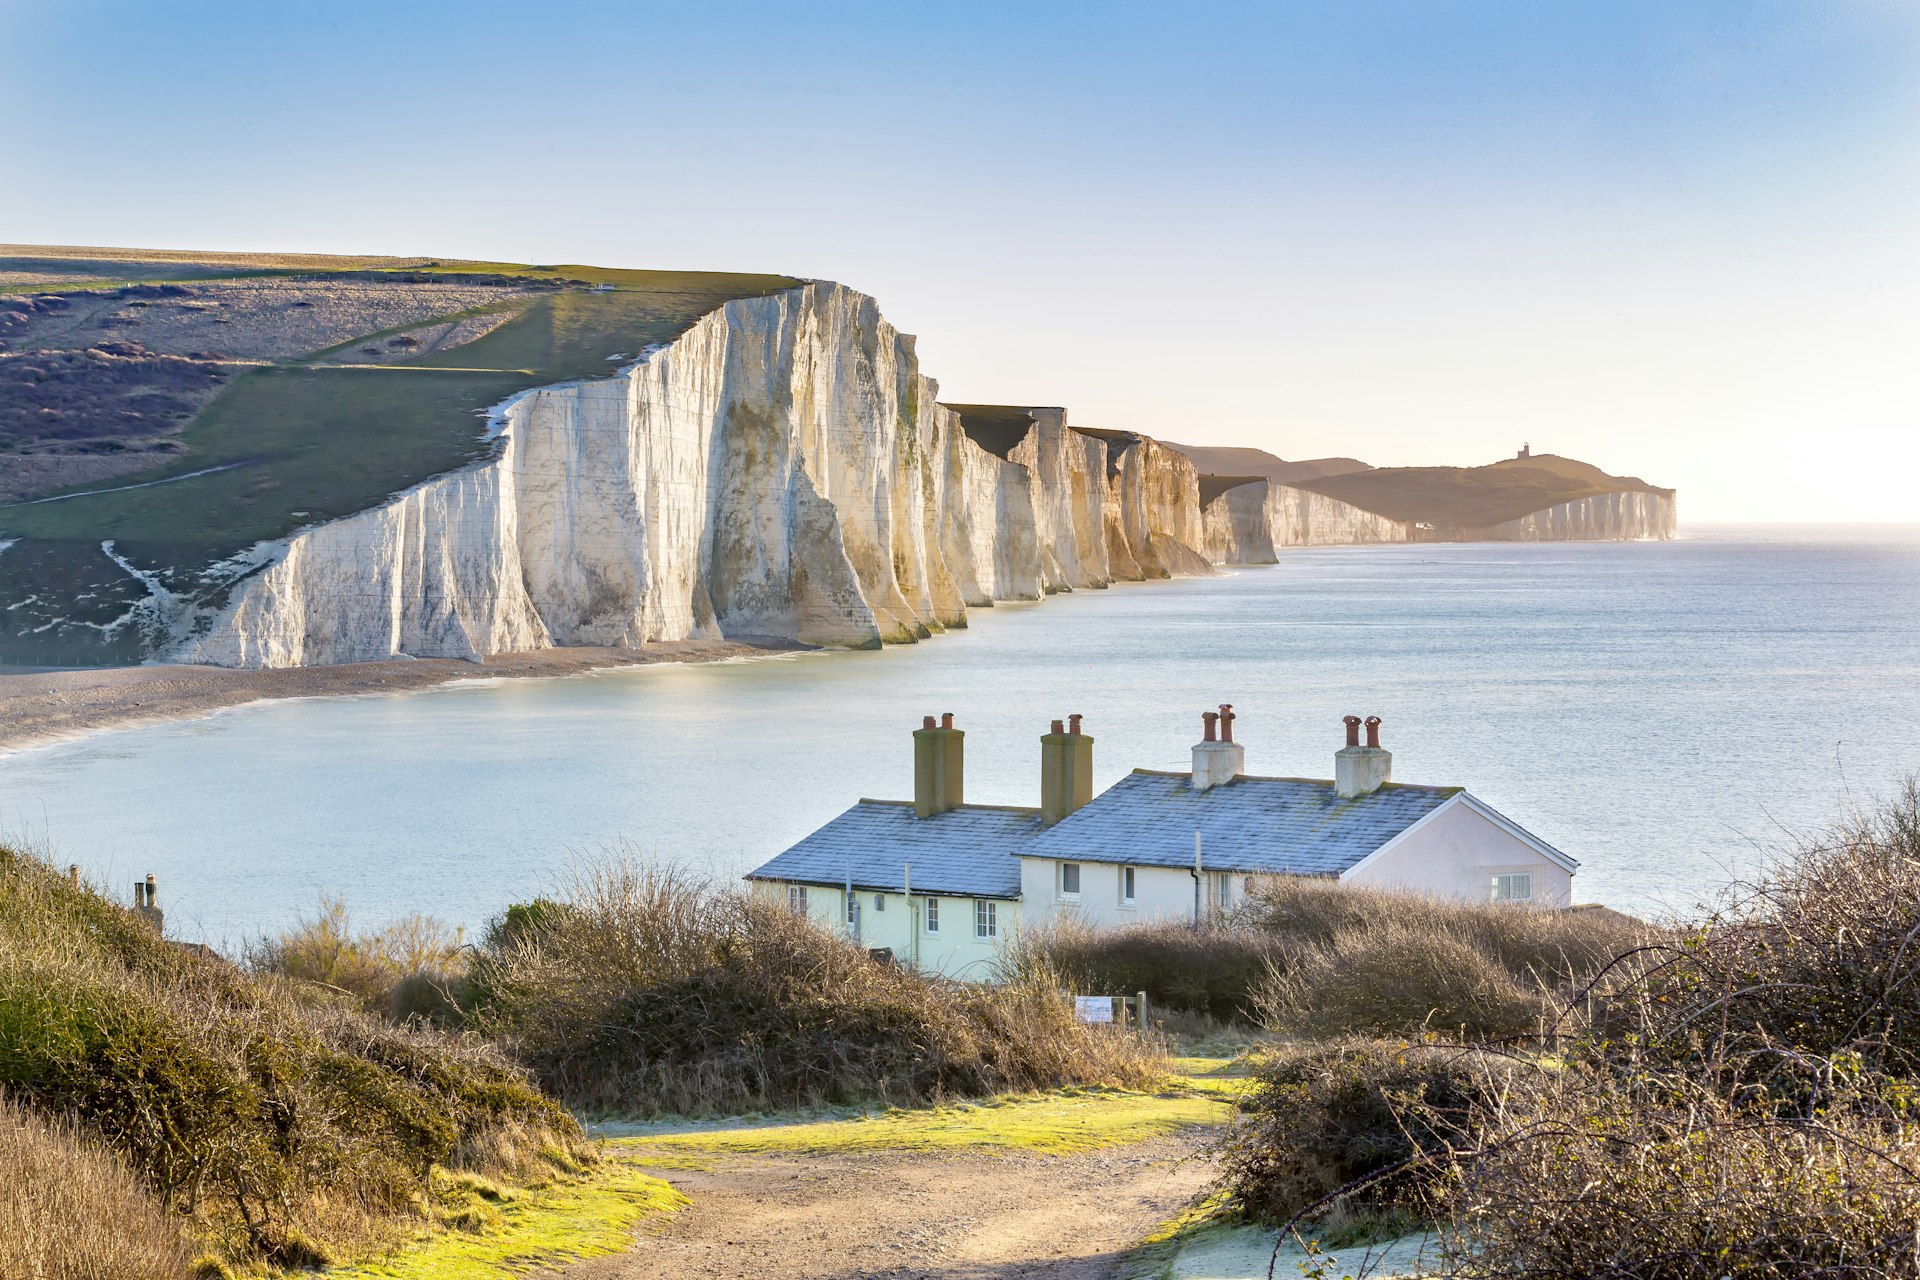 The Coast Guard Cottages and Seven Sisters chalk cliffs, Eastbourne, Sussex, England, UK